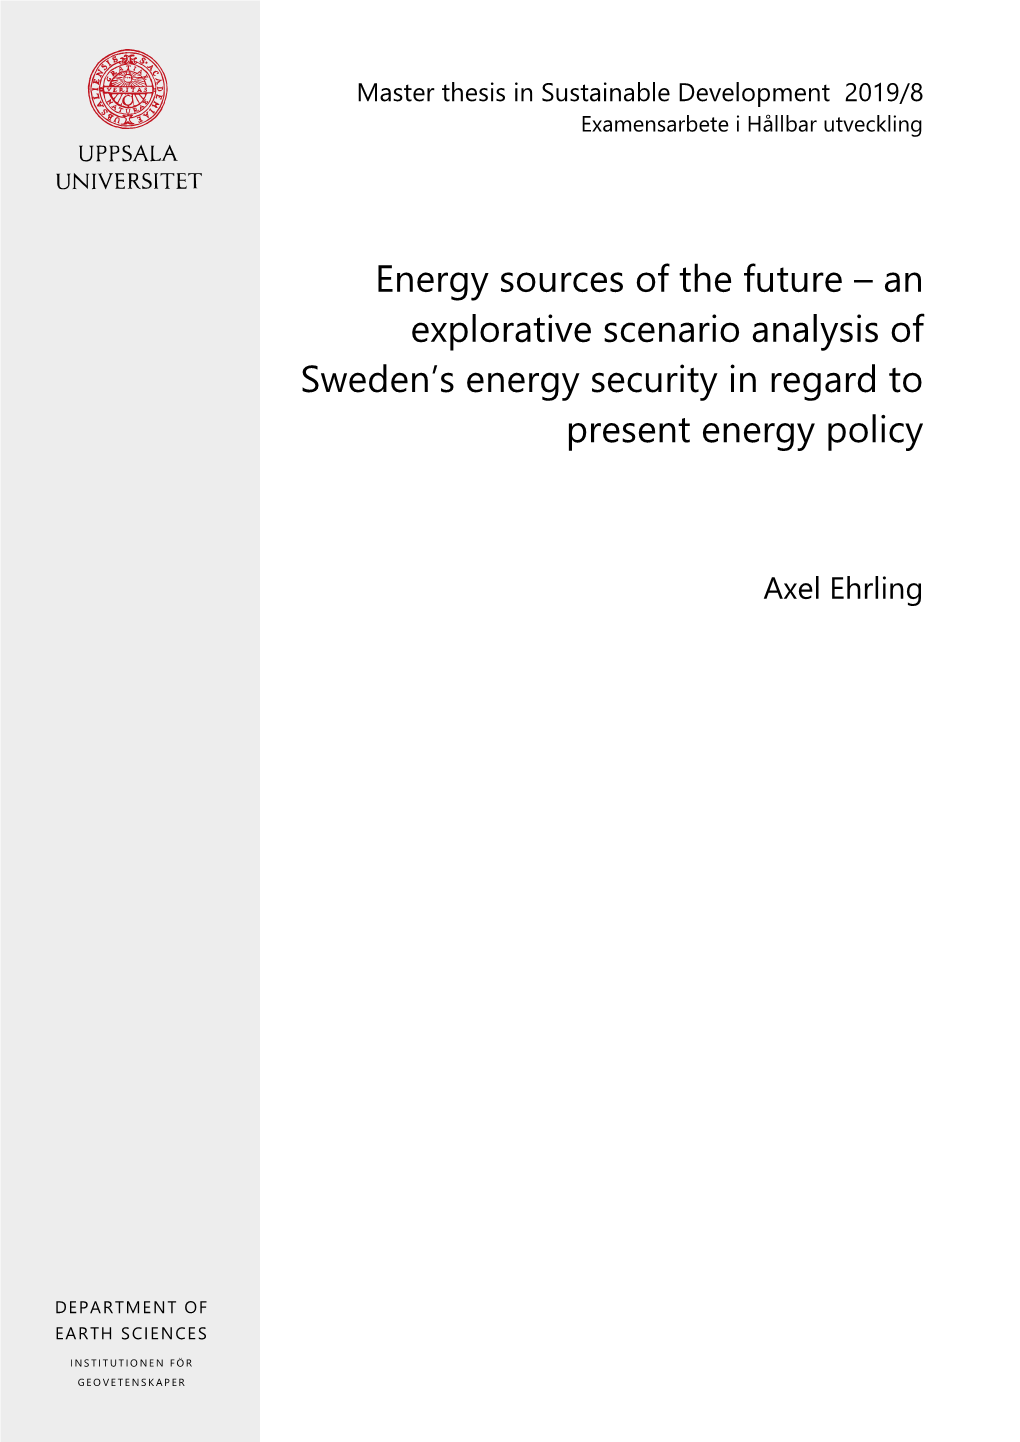 Energy Sources of the Future – an Explorative Scenario Analysis of Sweden’S Energy Security in Regard to Present Energy Policy